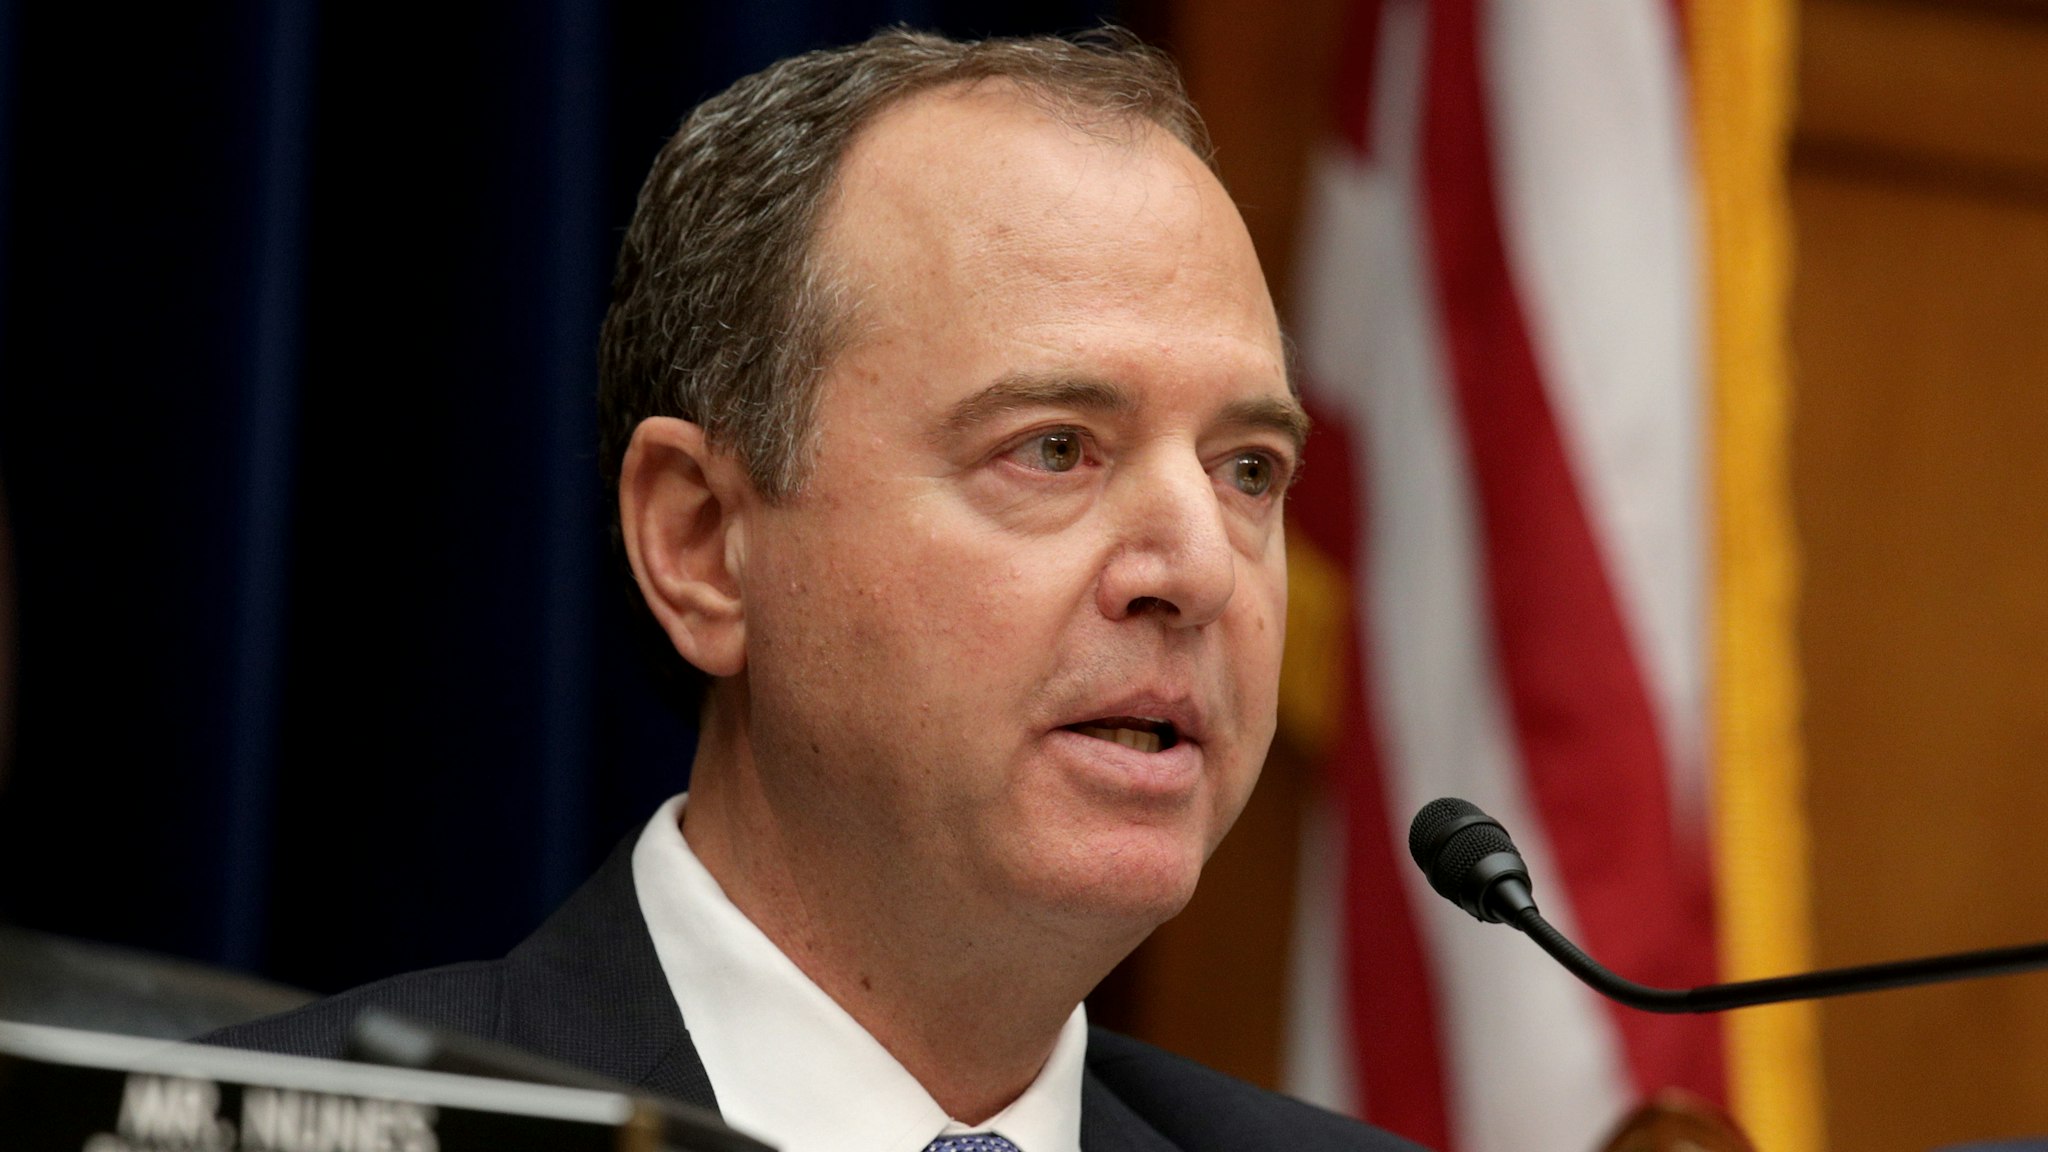 Committee chairman Rep. Adam Schiff (D-CA) delivers opening remarks at a hearing featuring Acting Director of National Intelligence Joseph Maguire testifying before the House Select Committee on Intelligence in the Rayburn House Office Building on Capitol Hill September 26, 2019 in Washington, DC.